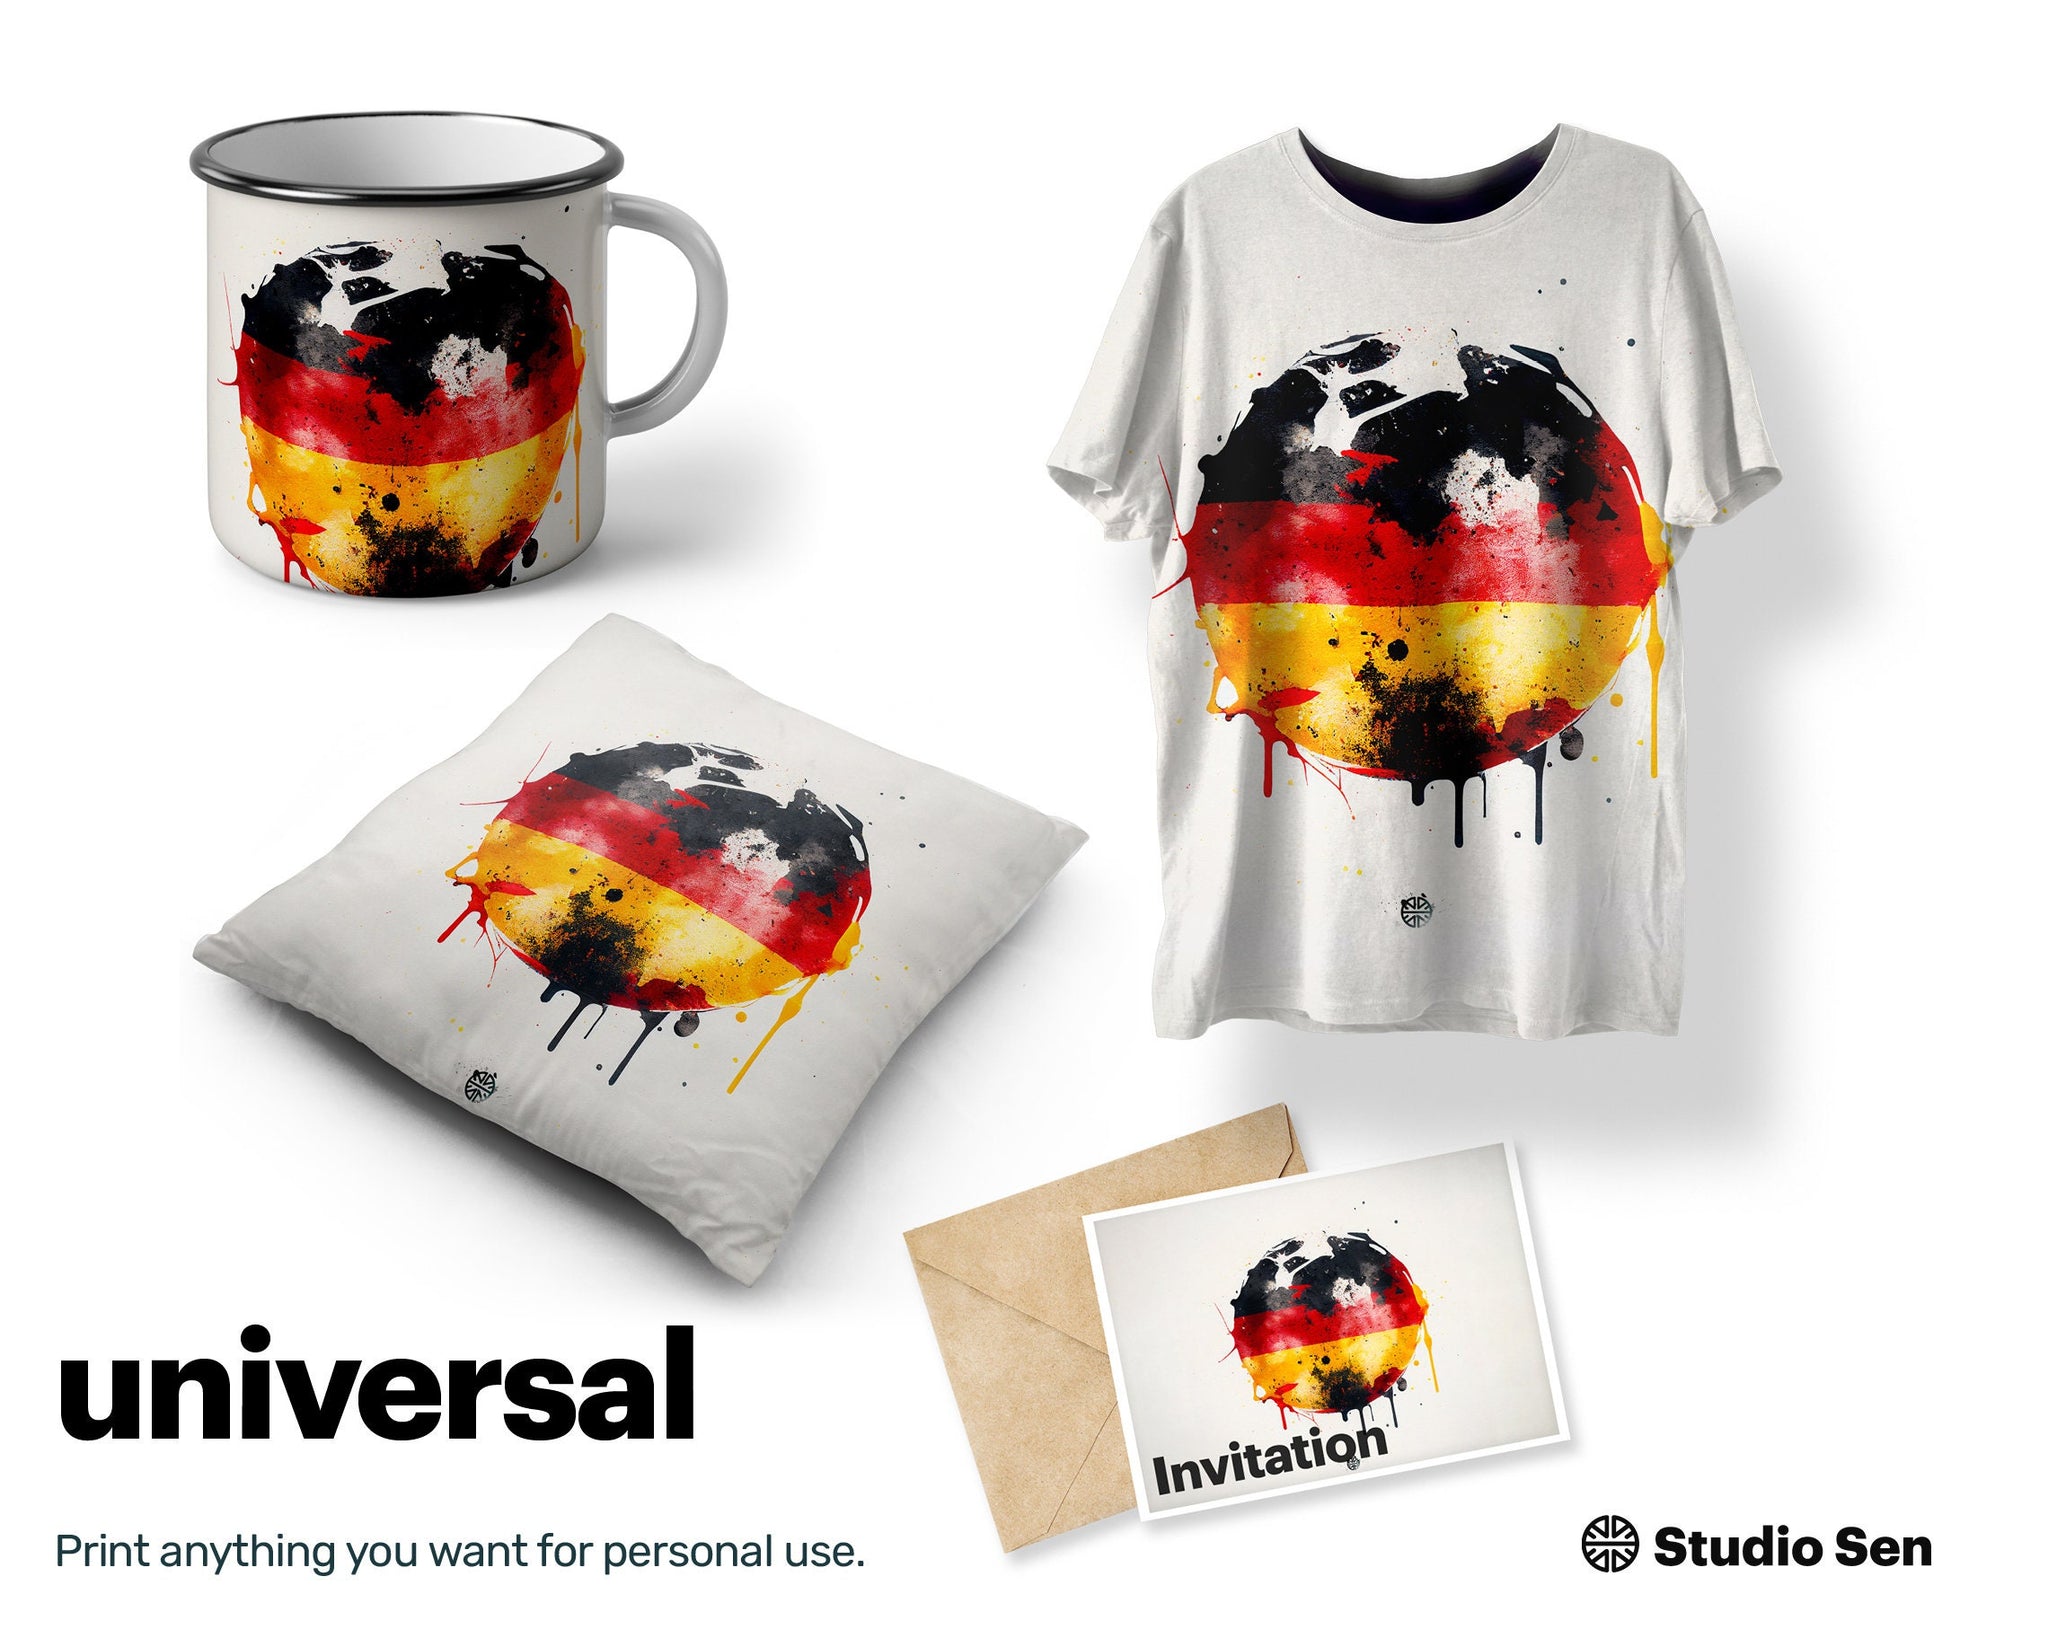 Seafaring Blissful German flag, Friendly Young Decoration, Oozing with charm Painted Young Irresistible Playful Mug Print